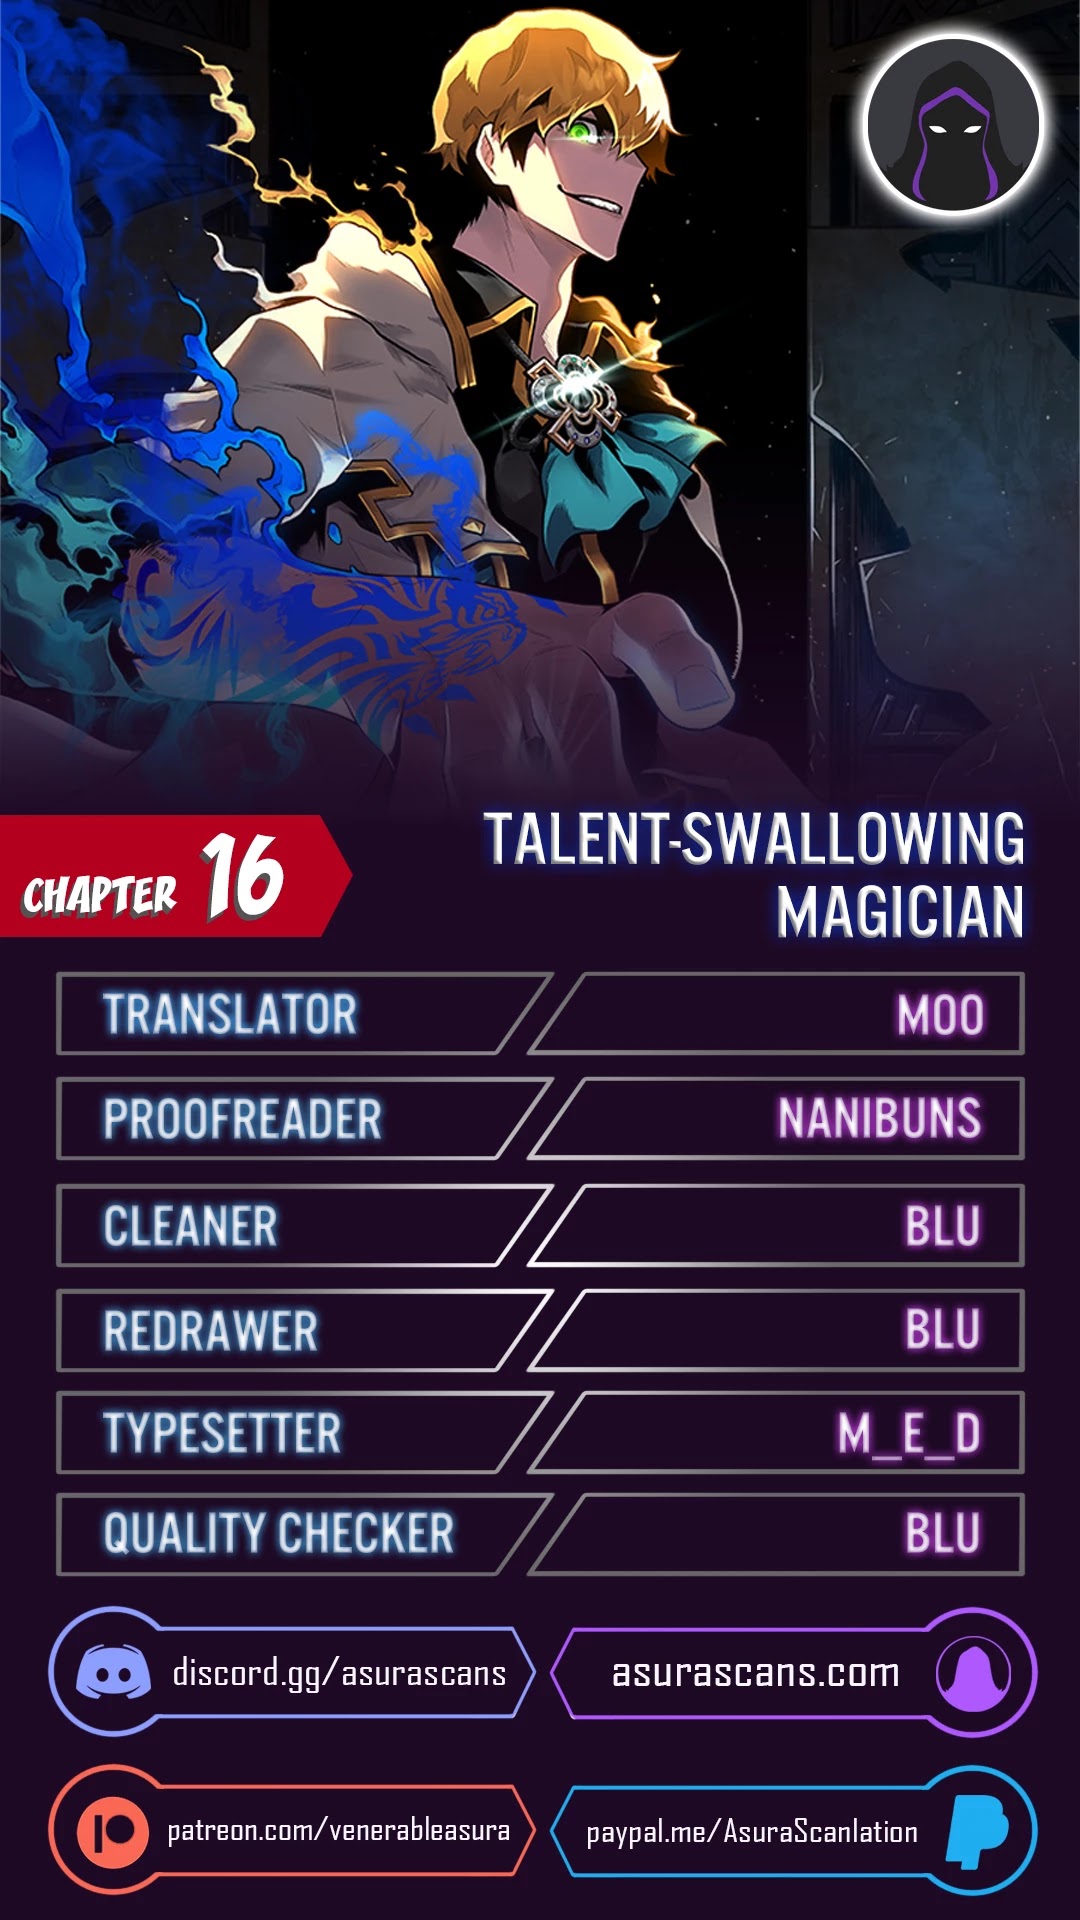 Talent-Swallowing Magician - Page 1